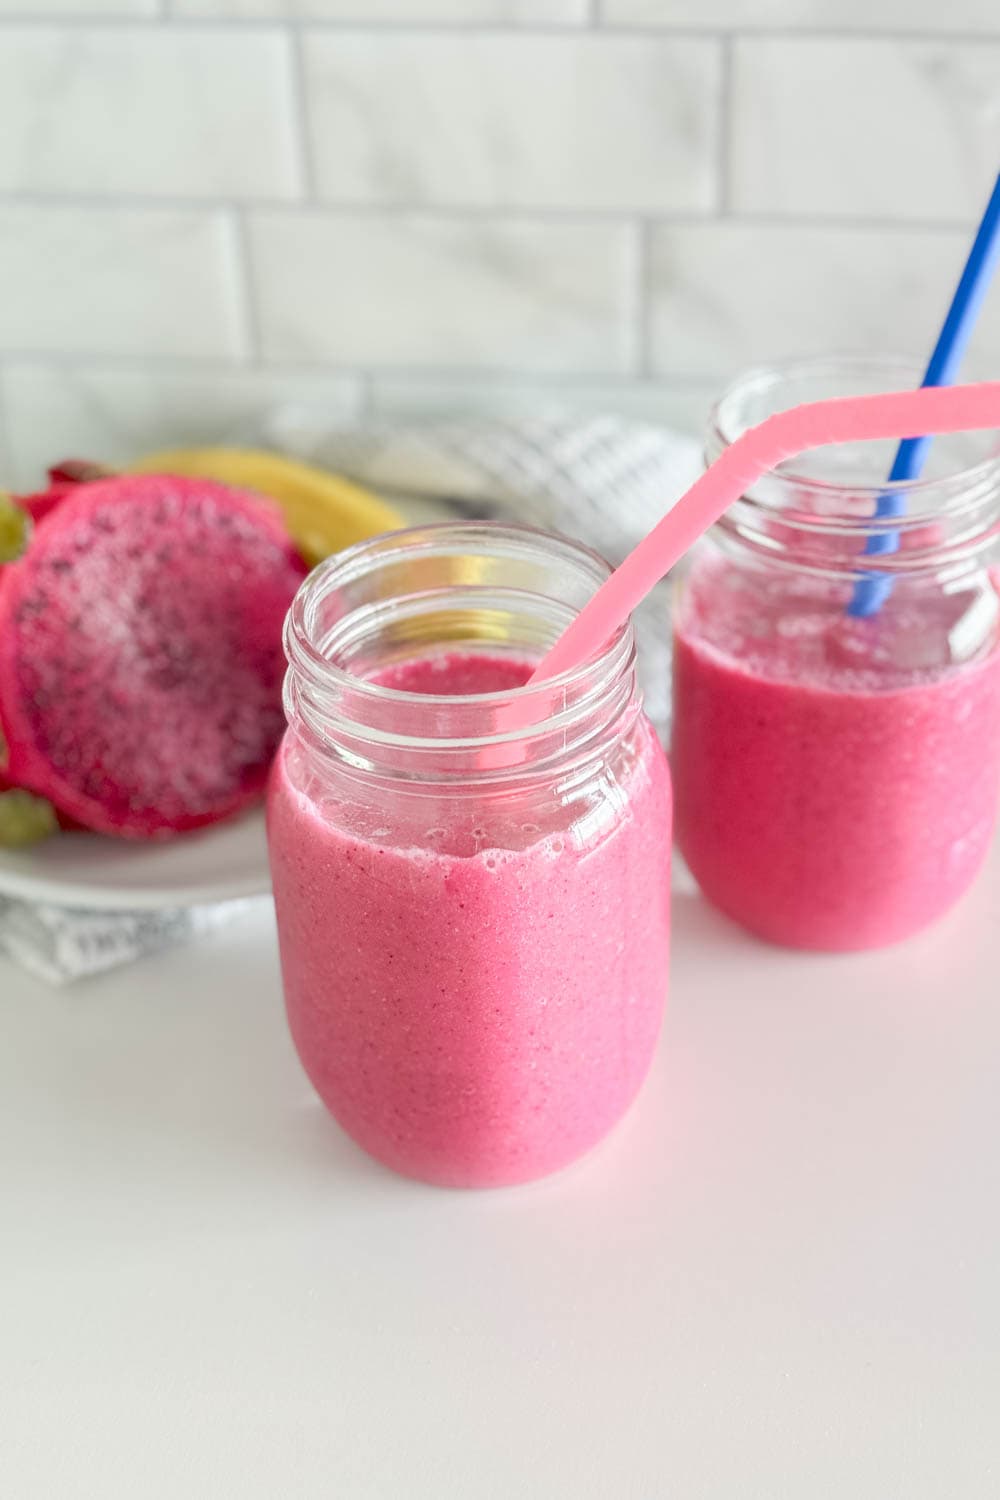 Two mason jars filled with a vibrant pink smoothie that is a vegan tropical smoothie, each with its own colored silicone straw and half a dragon fruit in the background